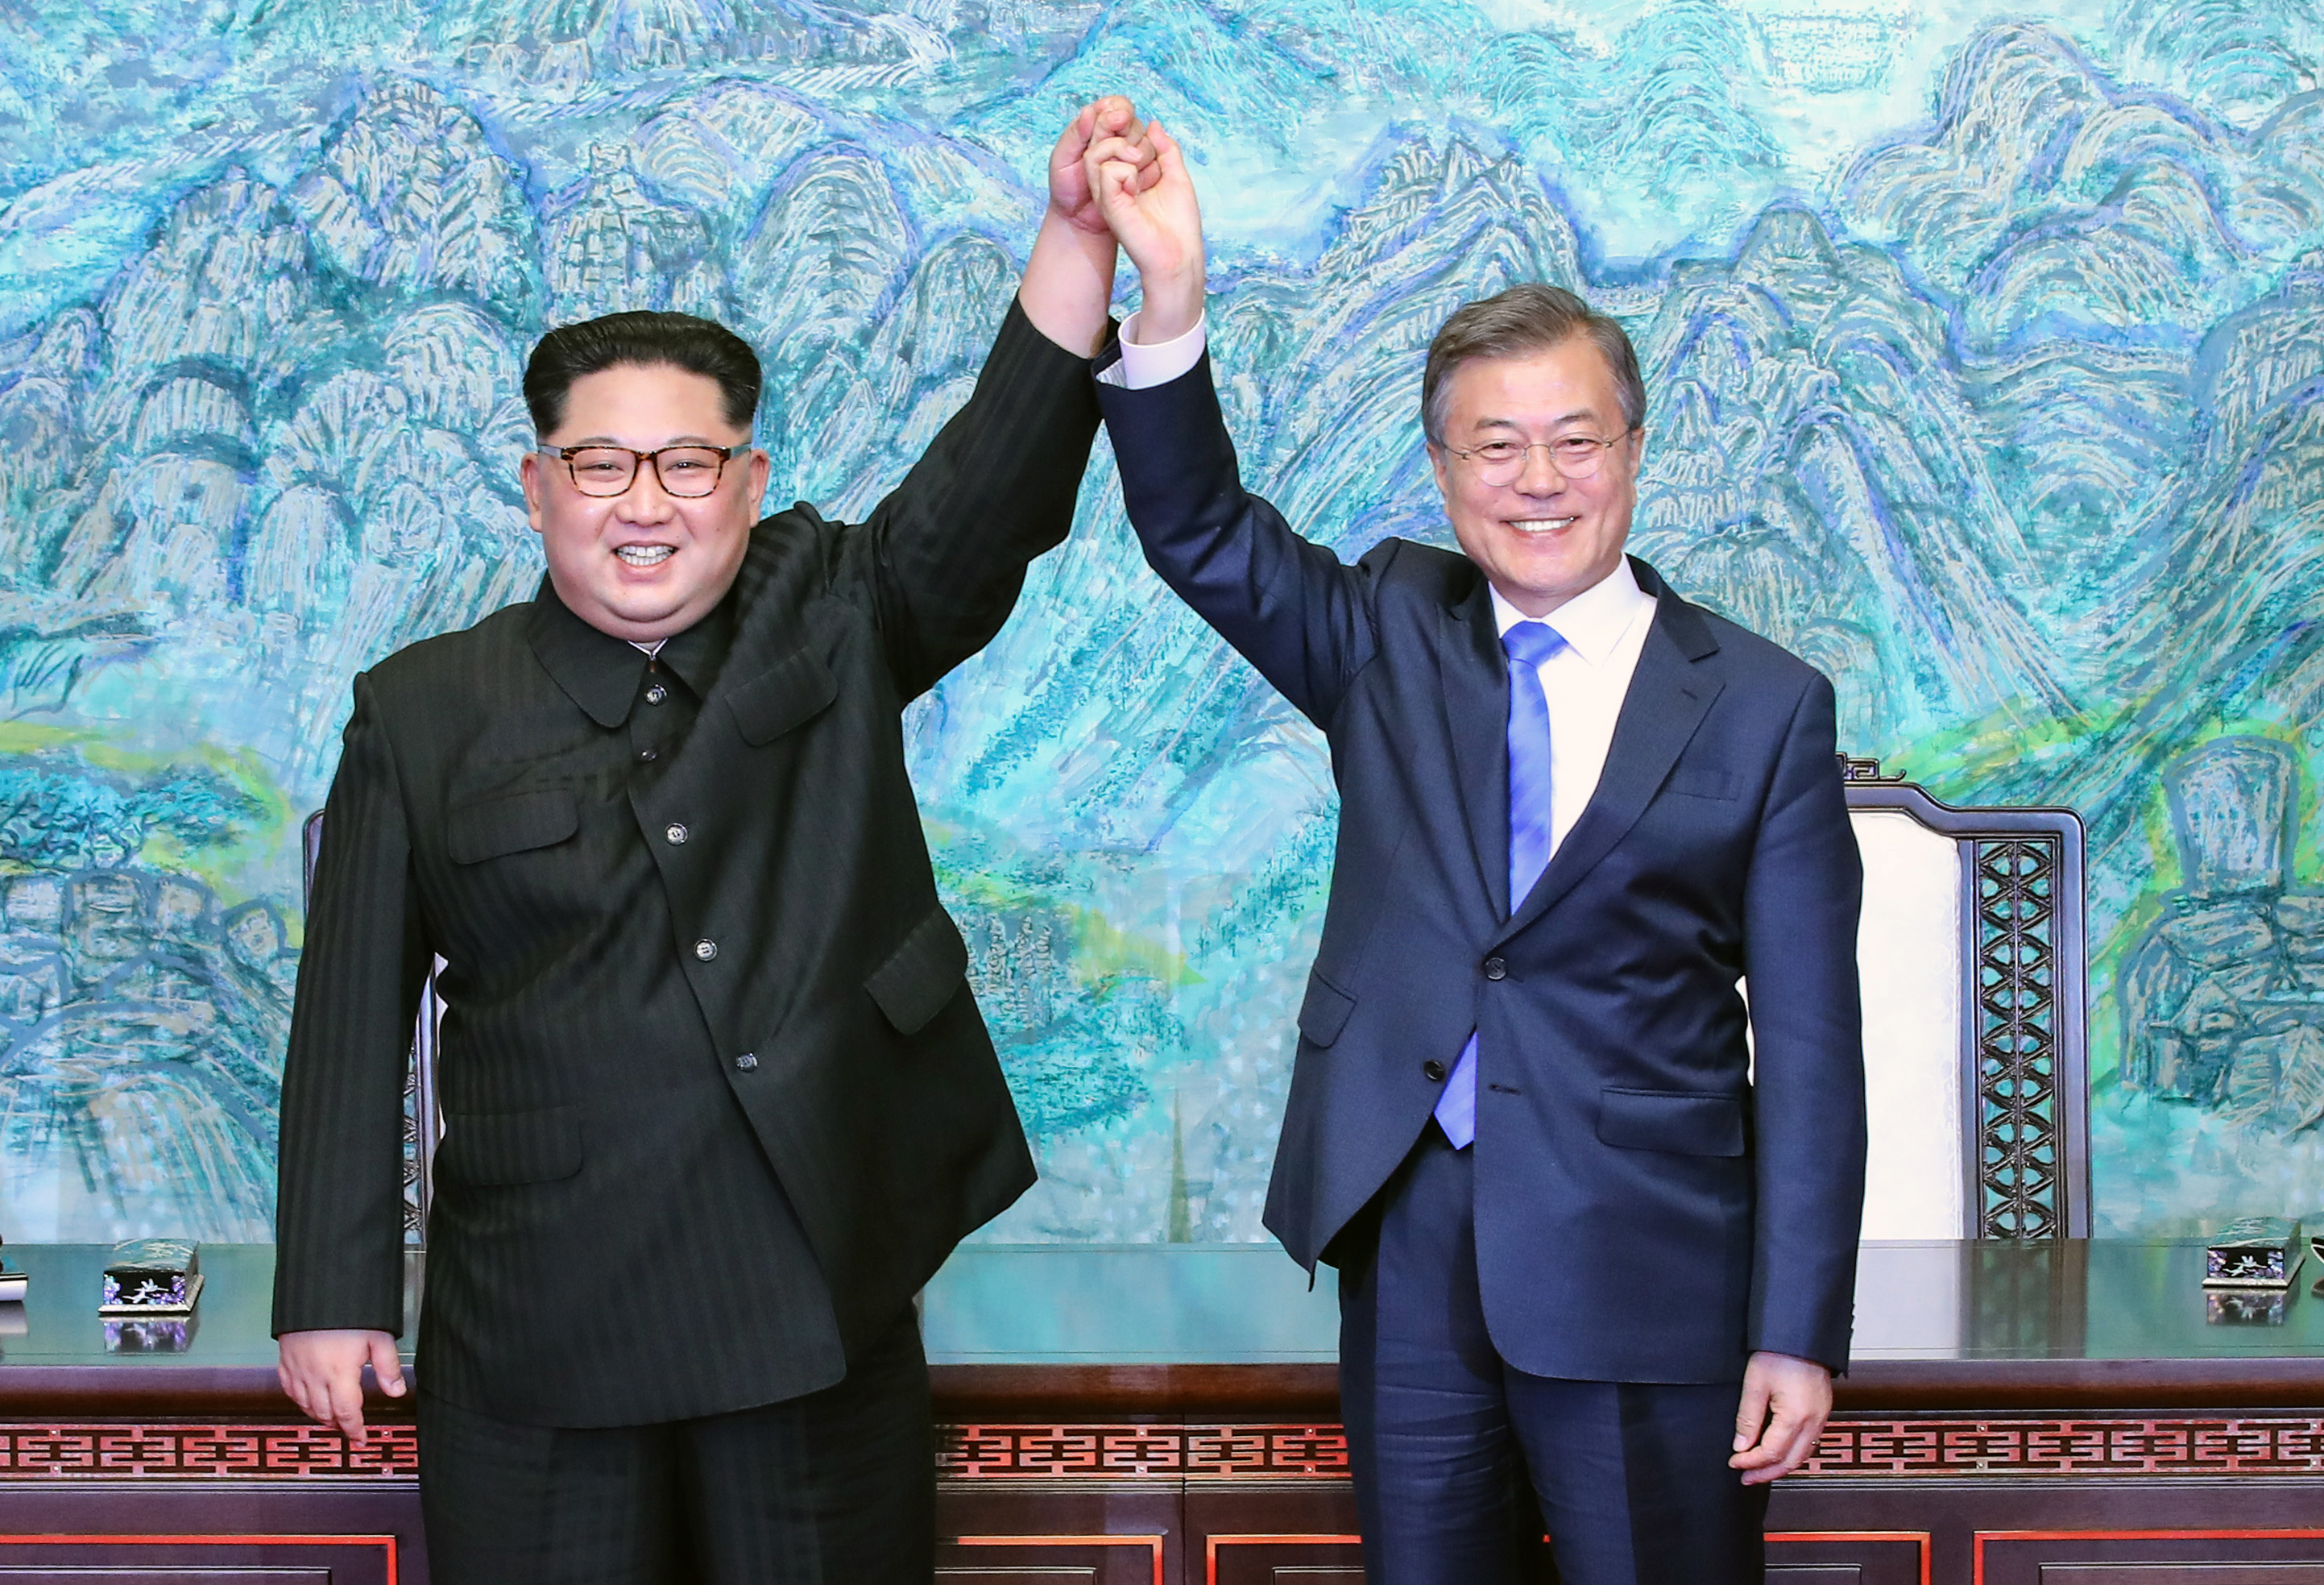 North Korean leader Kim Jong Un (L) and South Korean President Moon Jae-in (R) pose for photographs after signing the Panmunjom Declaration for Peace, Prosperity and Unification of the Korean Peninsula during the Inter-Korean Summit on April 27, 2018. (—Getty Images)